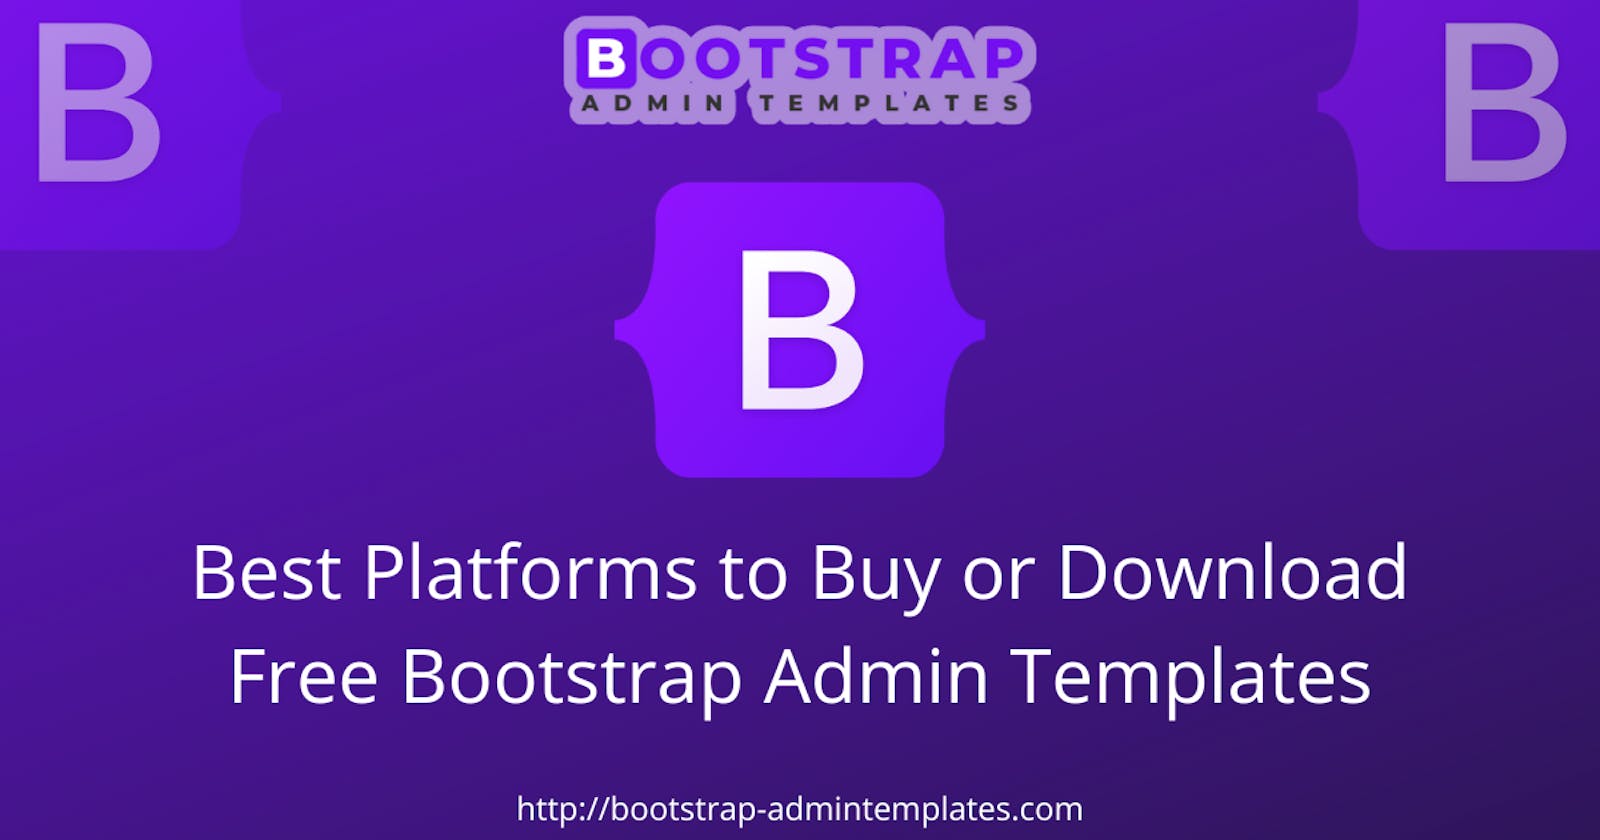 Best Platforms to Buy or Download Free Bootstrap Admin Templates